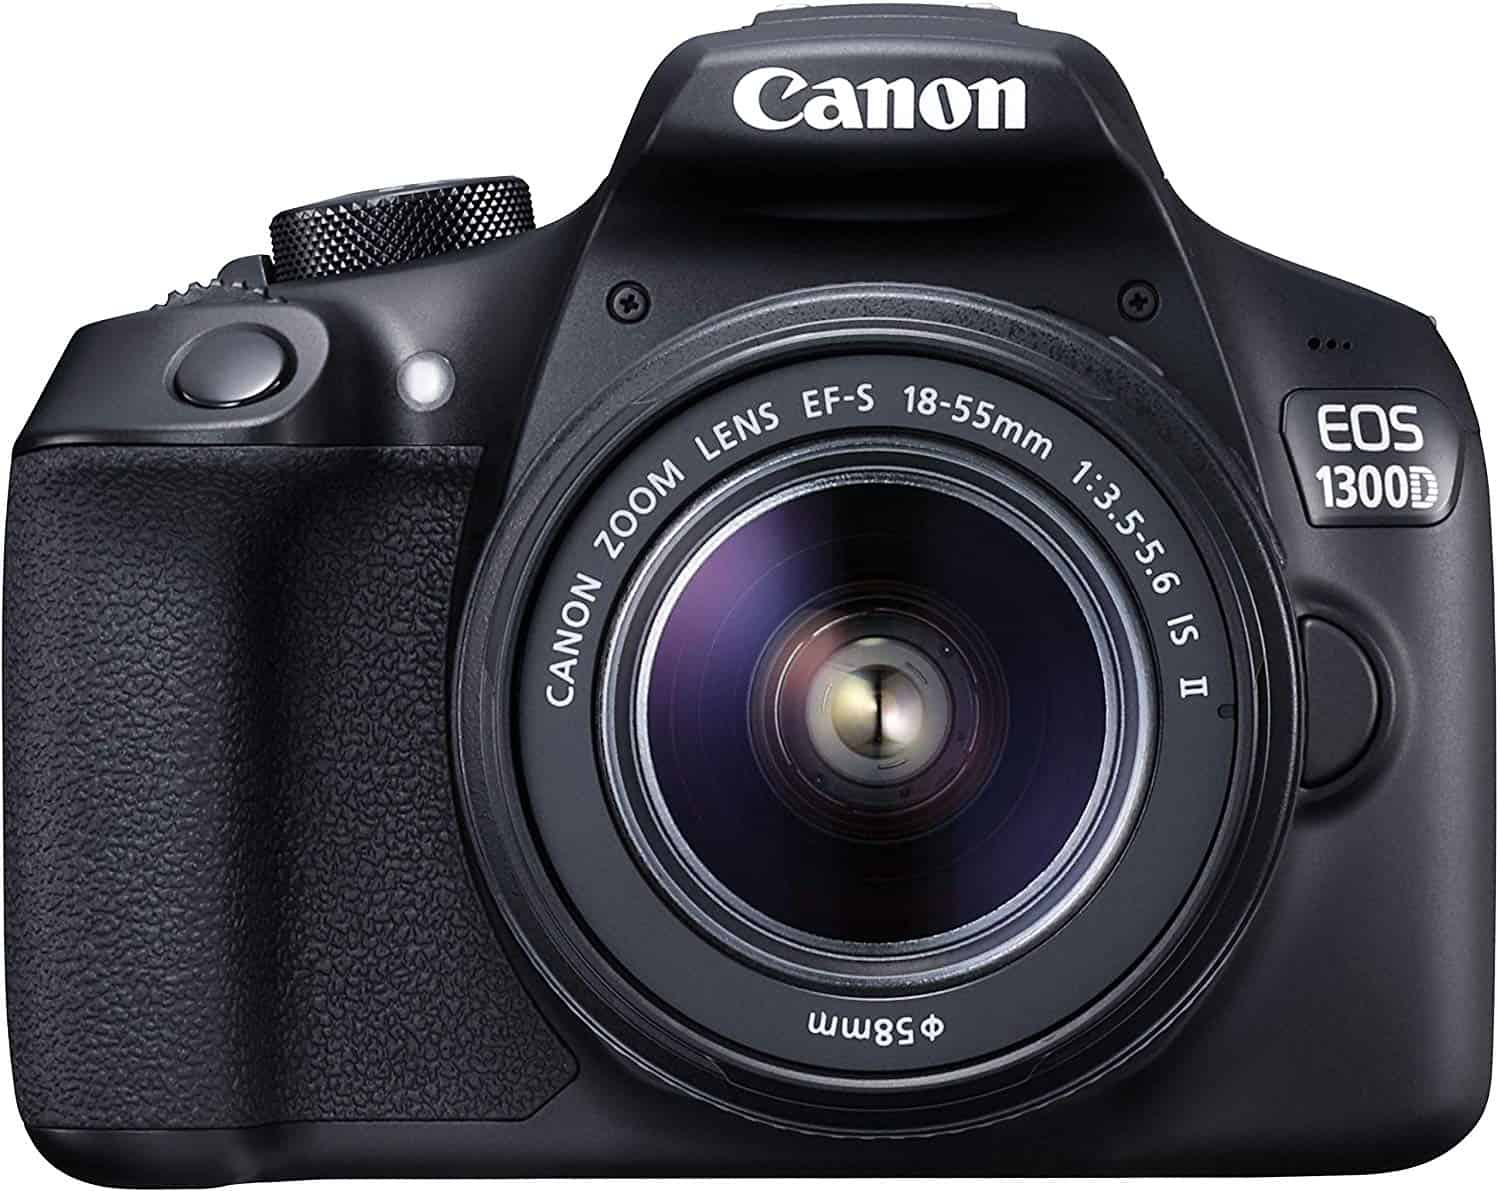 Canon Digital SLR Camera (Black) with 18-55mm ISII Lens, 16GB Card and Carry Case - EOS 1300D 18MP